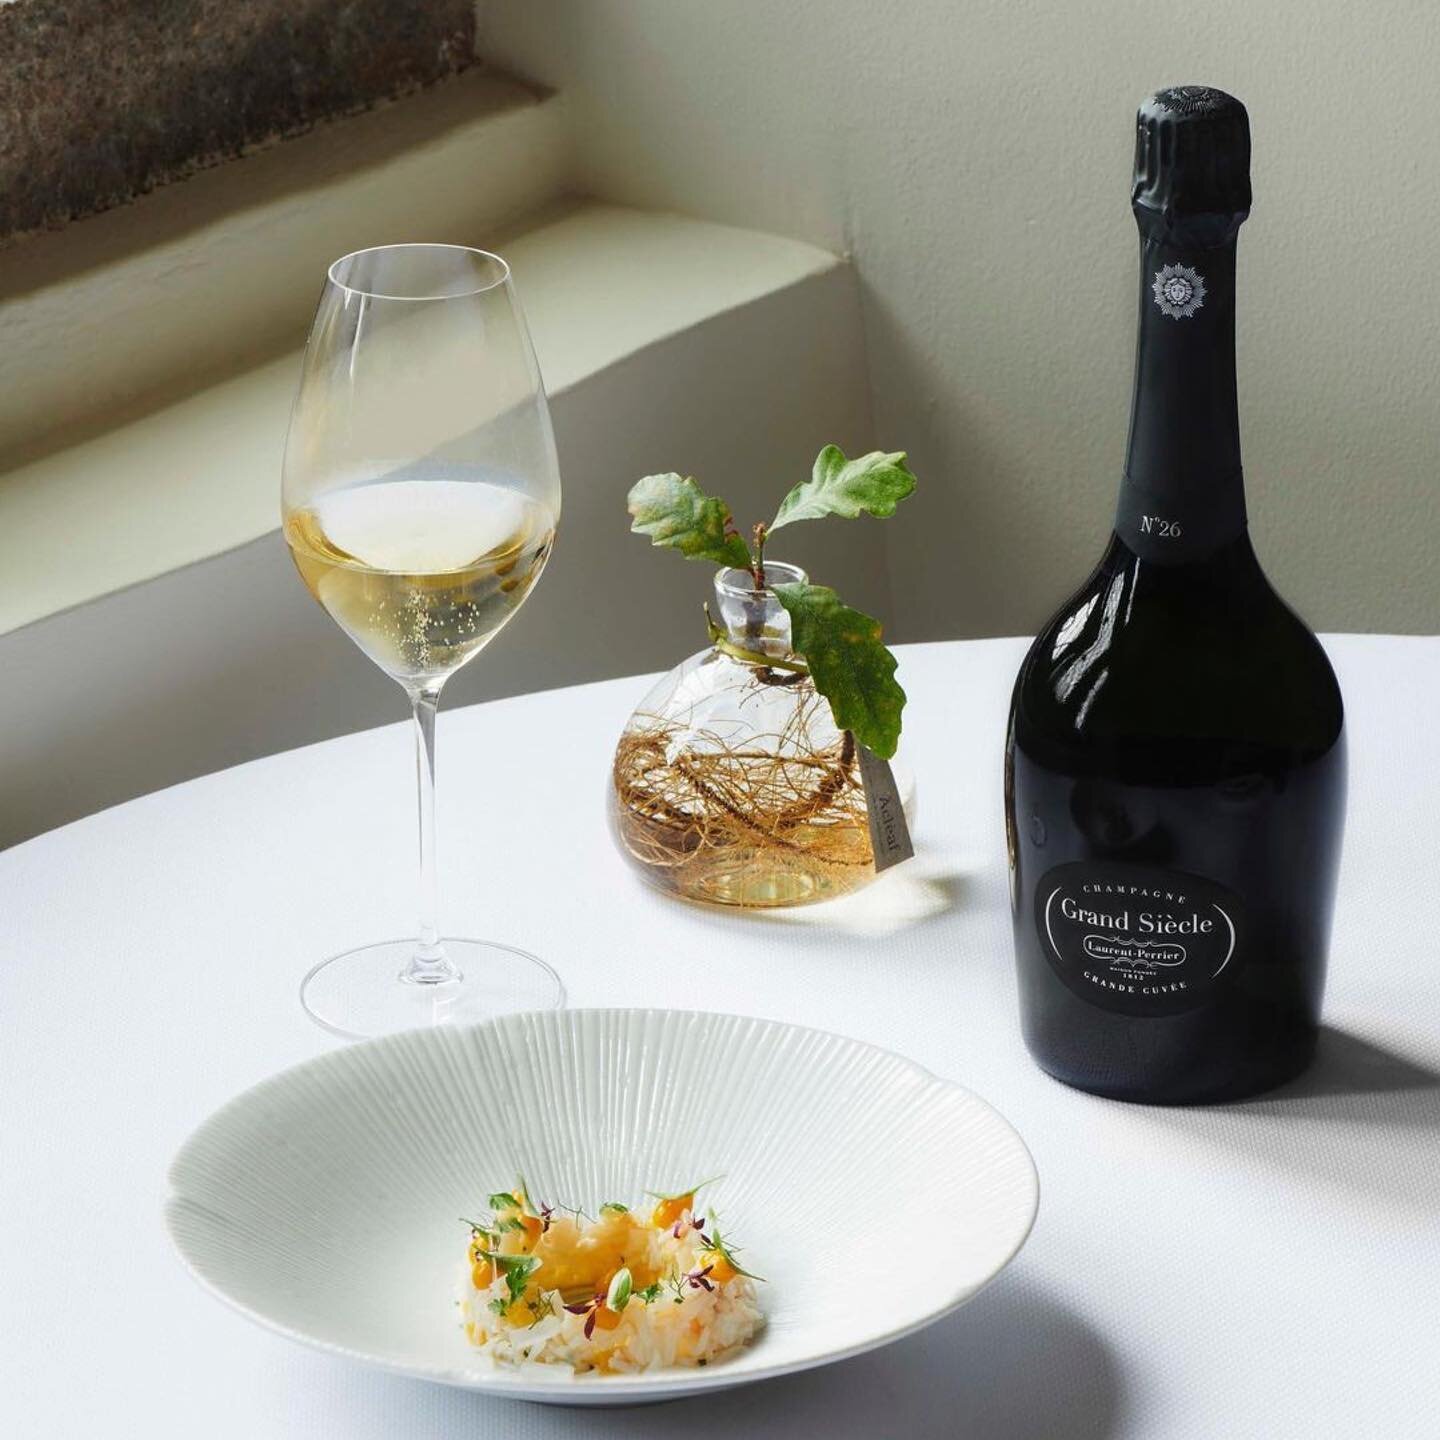 Join us this Autumn where we have teamed up with Laurent-Perrier as one of seven restaurants in the UK to offer a bespoke Grand Si&egrave;cle menu, including a glass of Grand Si&egrave;cle Iteration N&deg;26.

#LaurentPerrier #GrandSiecle #&agrave;cl